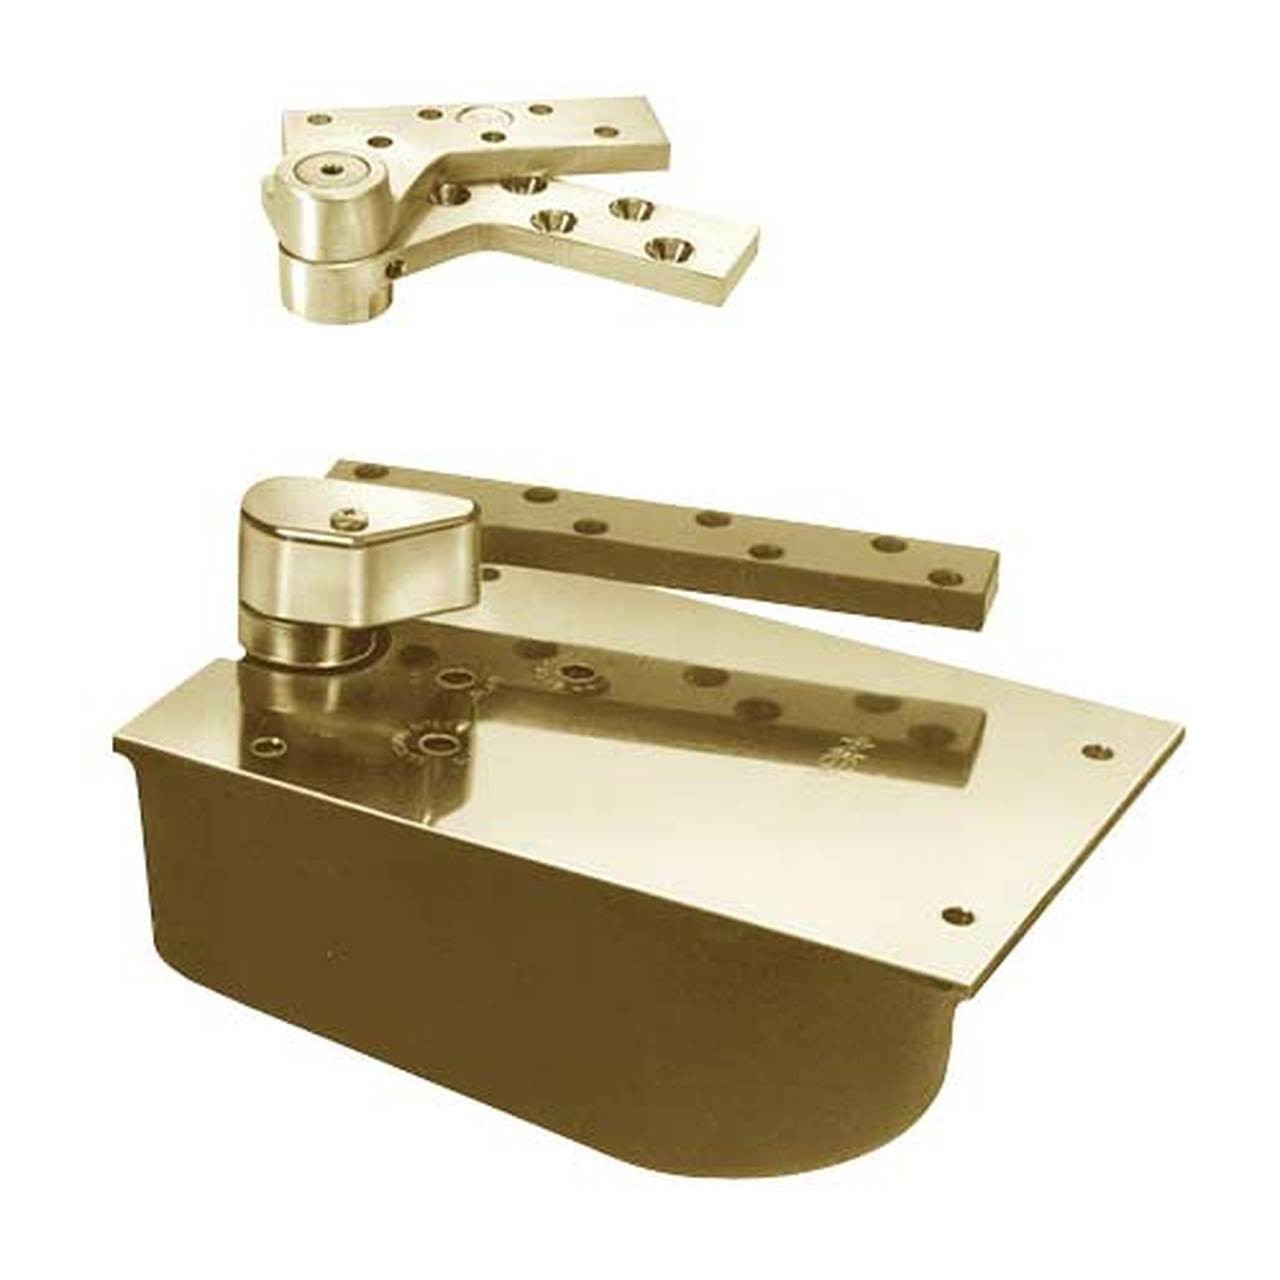 L27-105S-LFP-LCC-RH-2-606 Rixson 27 Series Extra Heavy Duty Lead Lined Offset Floor Closer in Satin Brass Finish